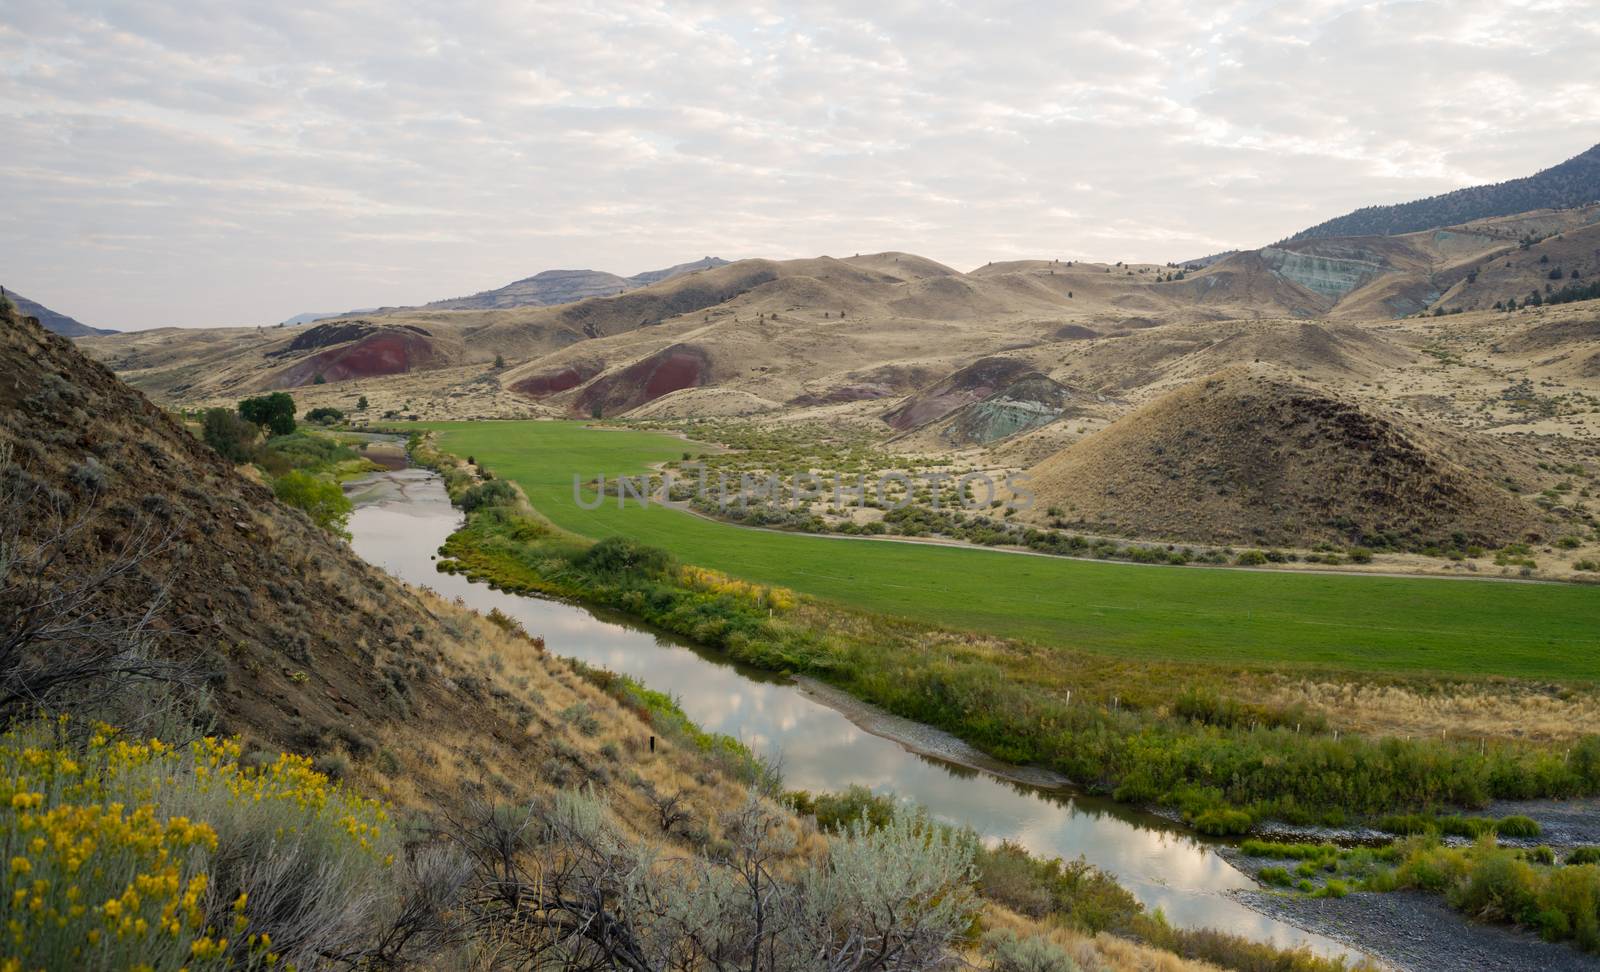 The sun readies to come up over urban landscape in the fossil beds